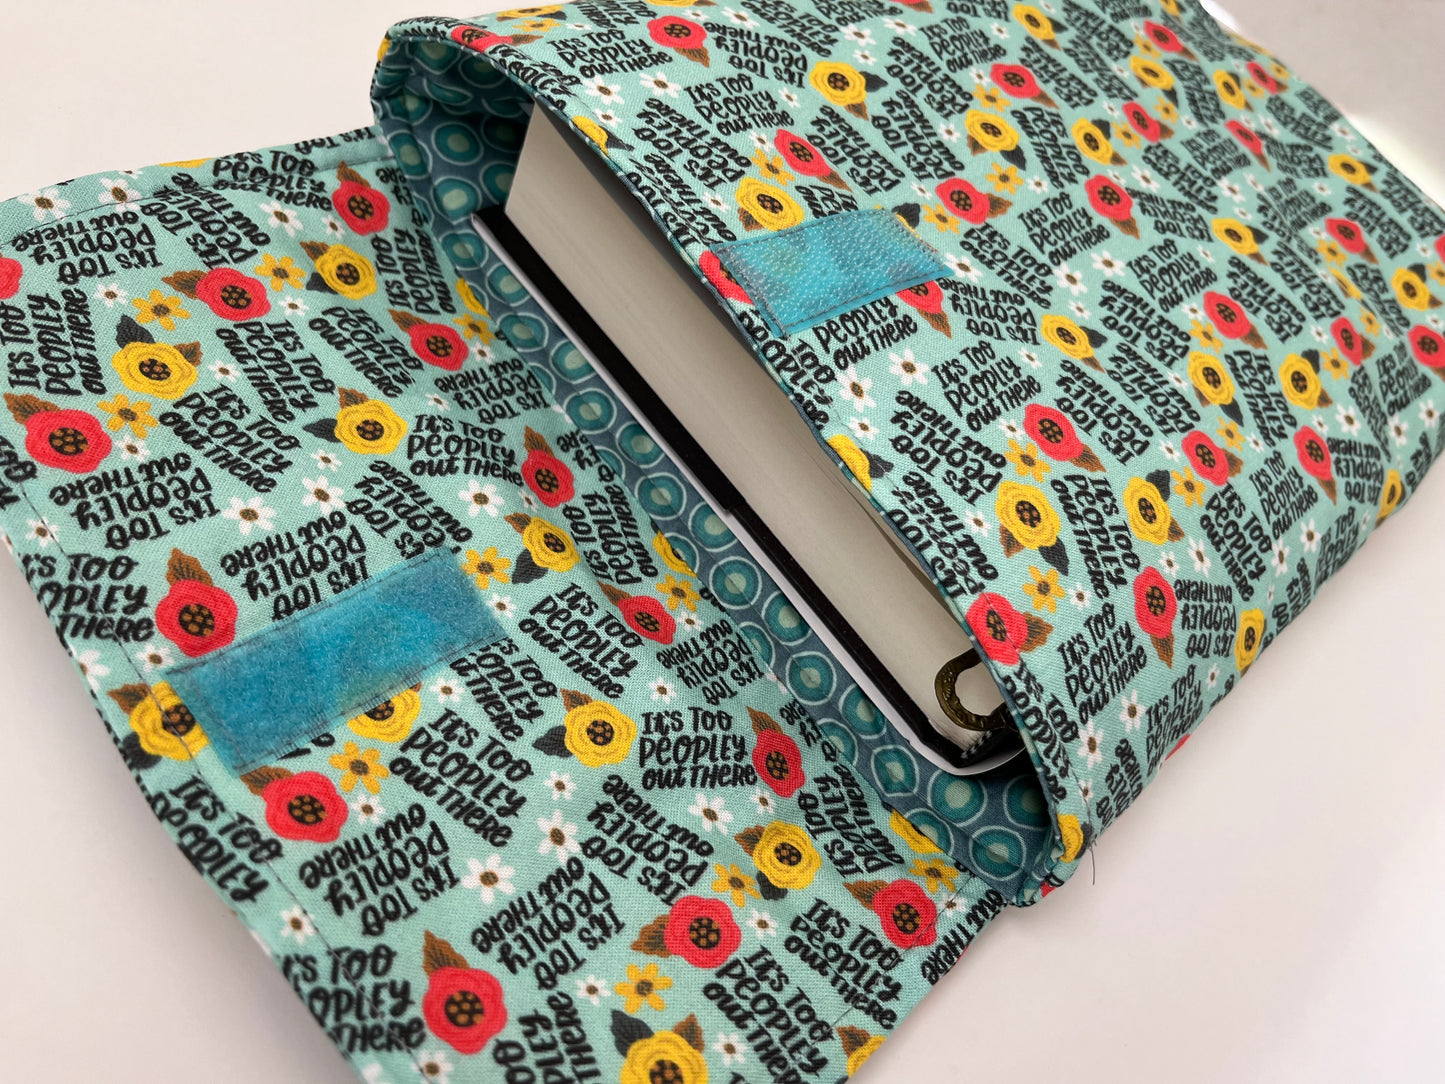 Padded Book Sleeve , It’s Too Peopley Out There